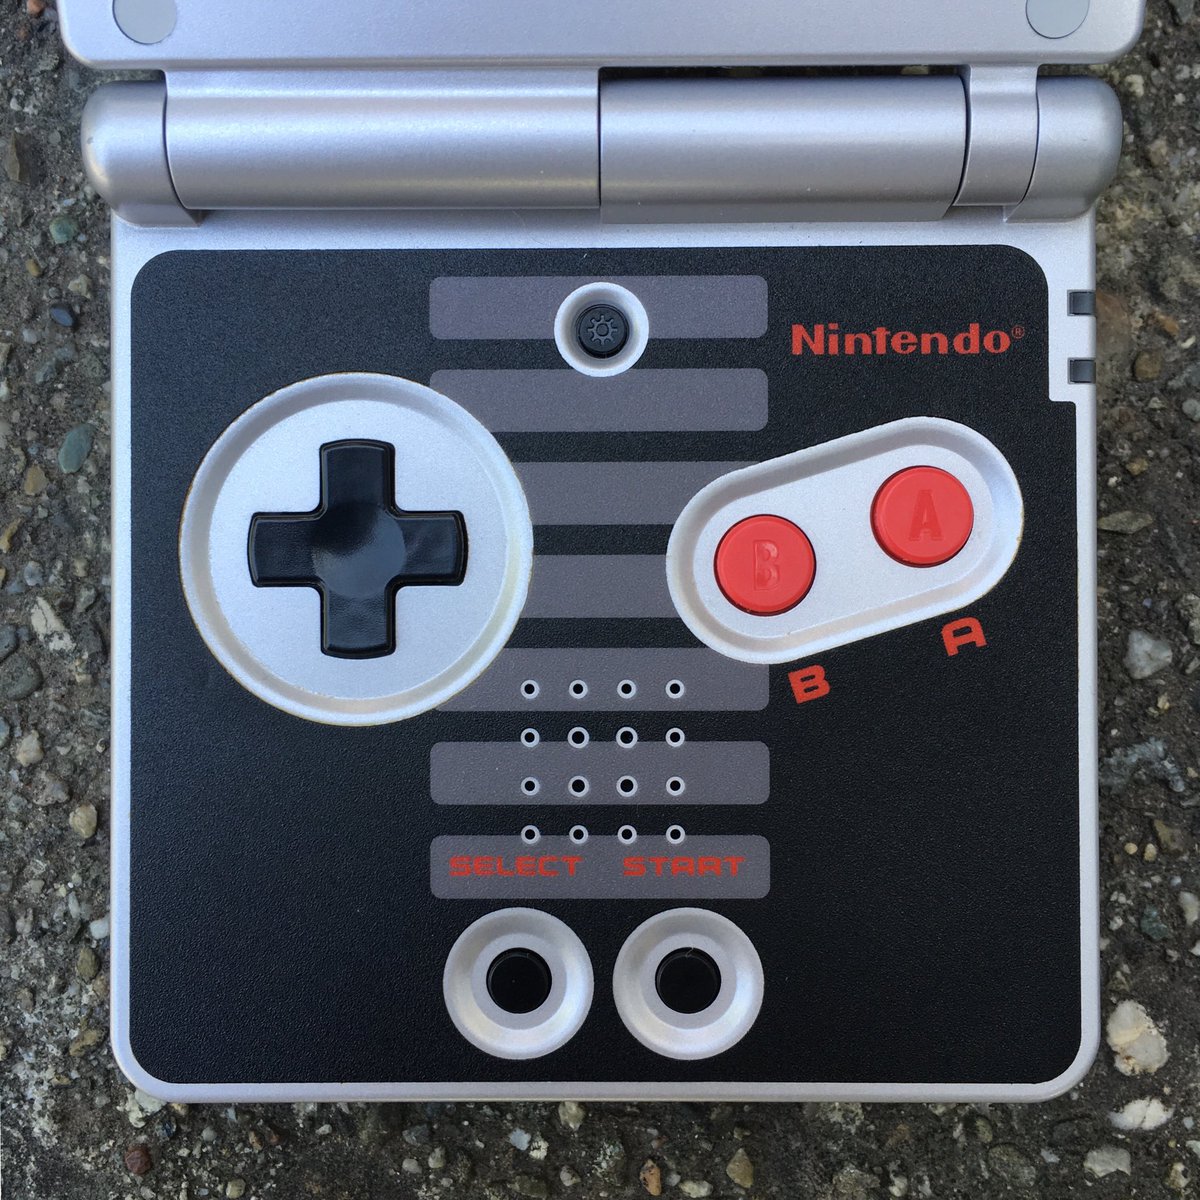 just look at that beauty~

#gba 🎮 #NES #nintendoNostalgia